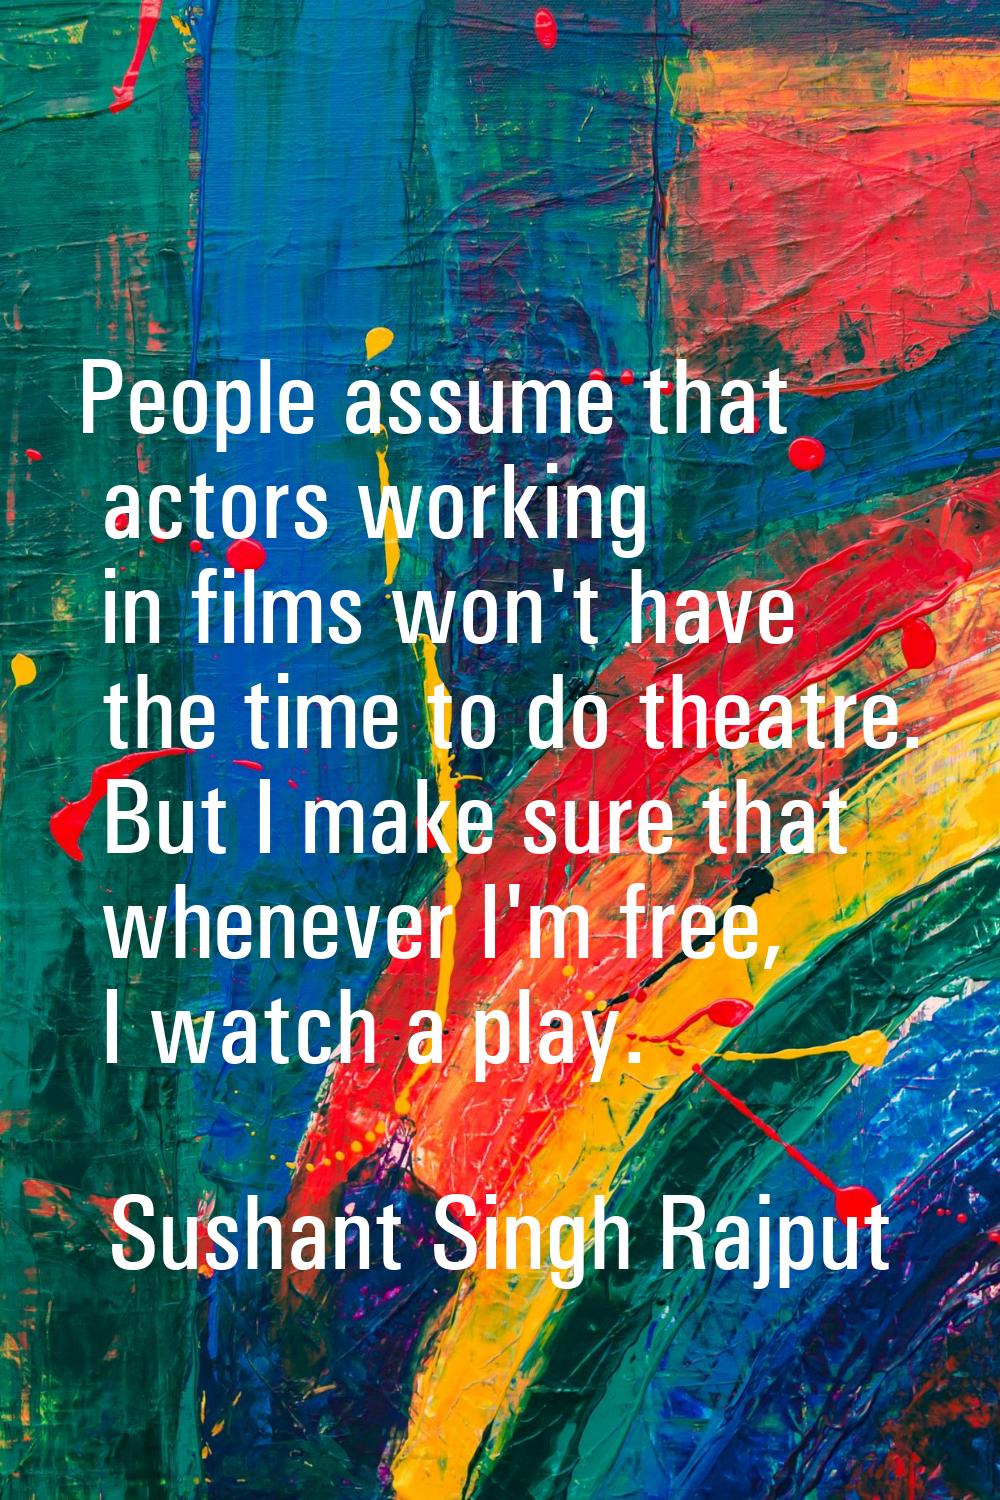 People assume that actors working in films won't have the time to do theatre. But I make sure that 